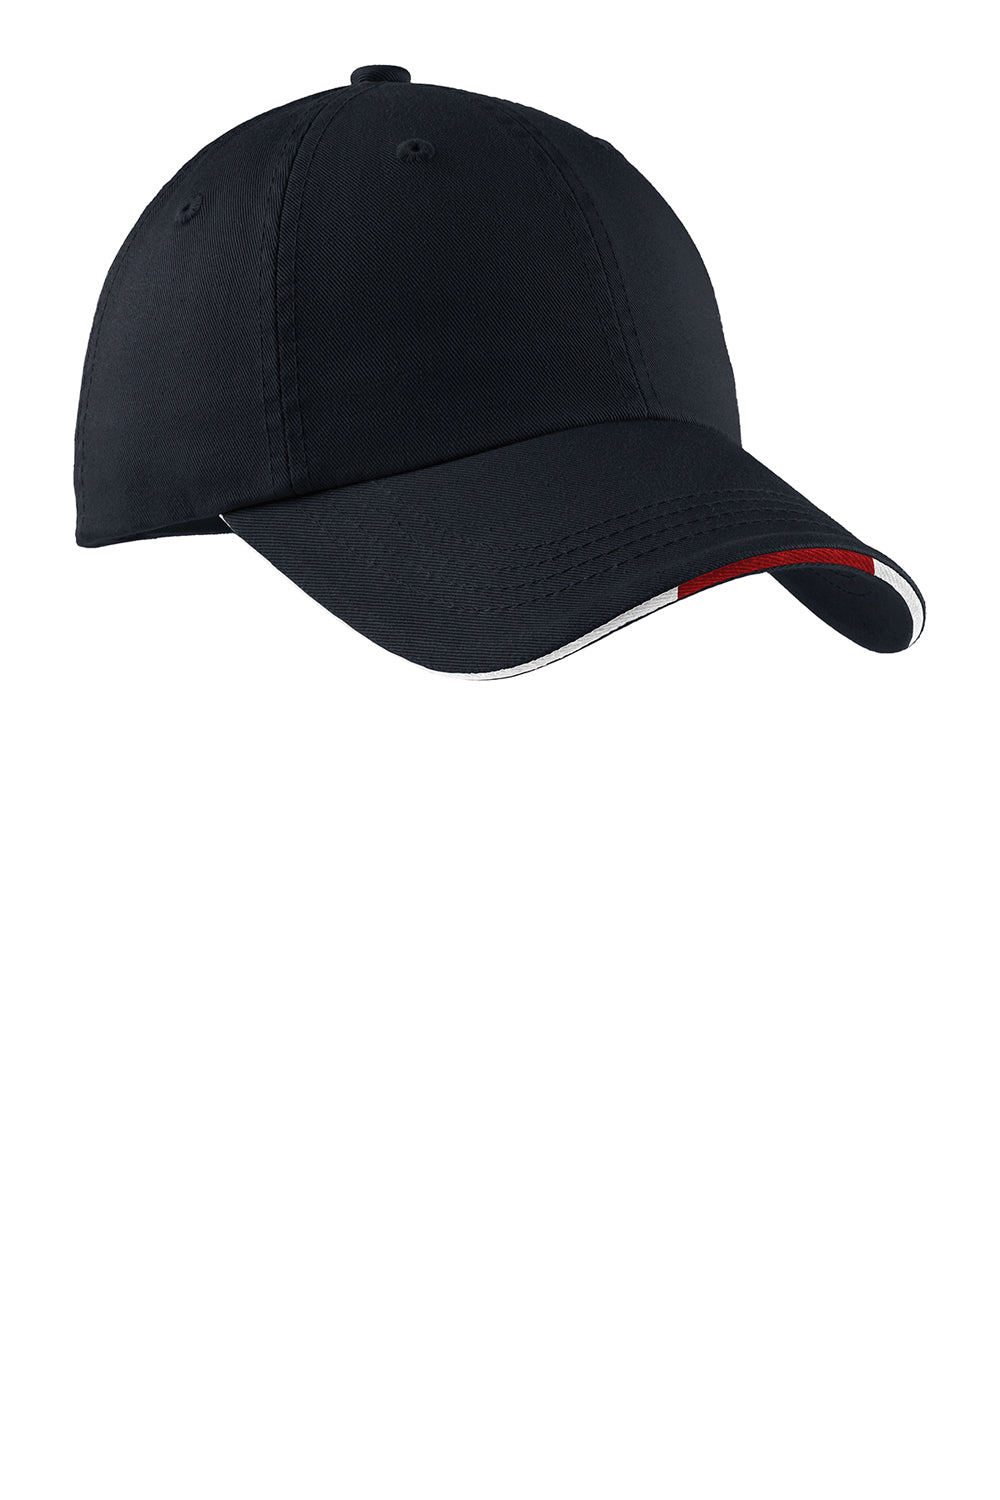 Port Authority C830 Mens Adjustable Hat Navy Blue/Red/White Front